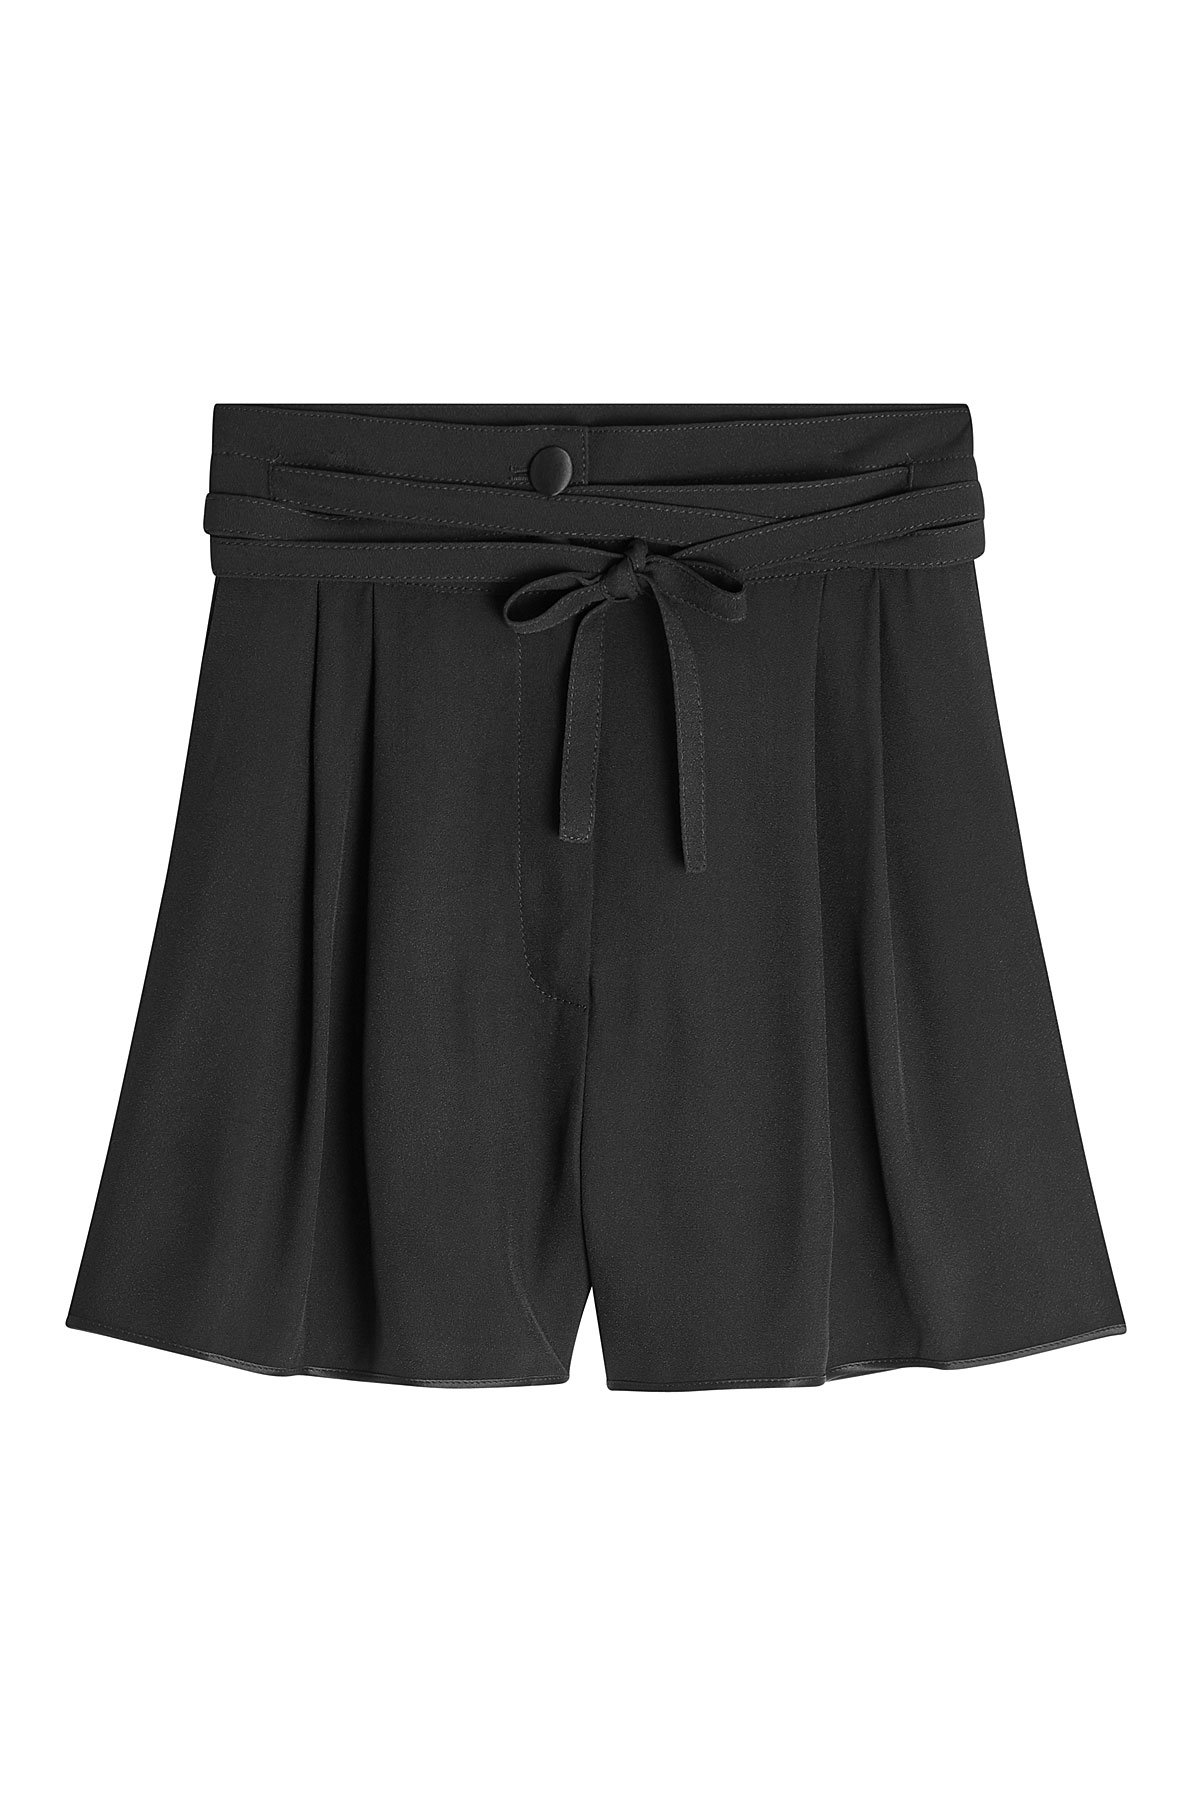 Marc Jacobs - Shorts with Self-Tie Belt